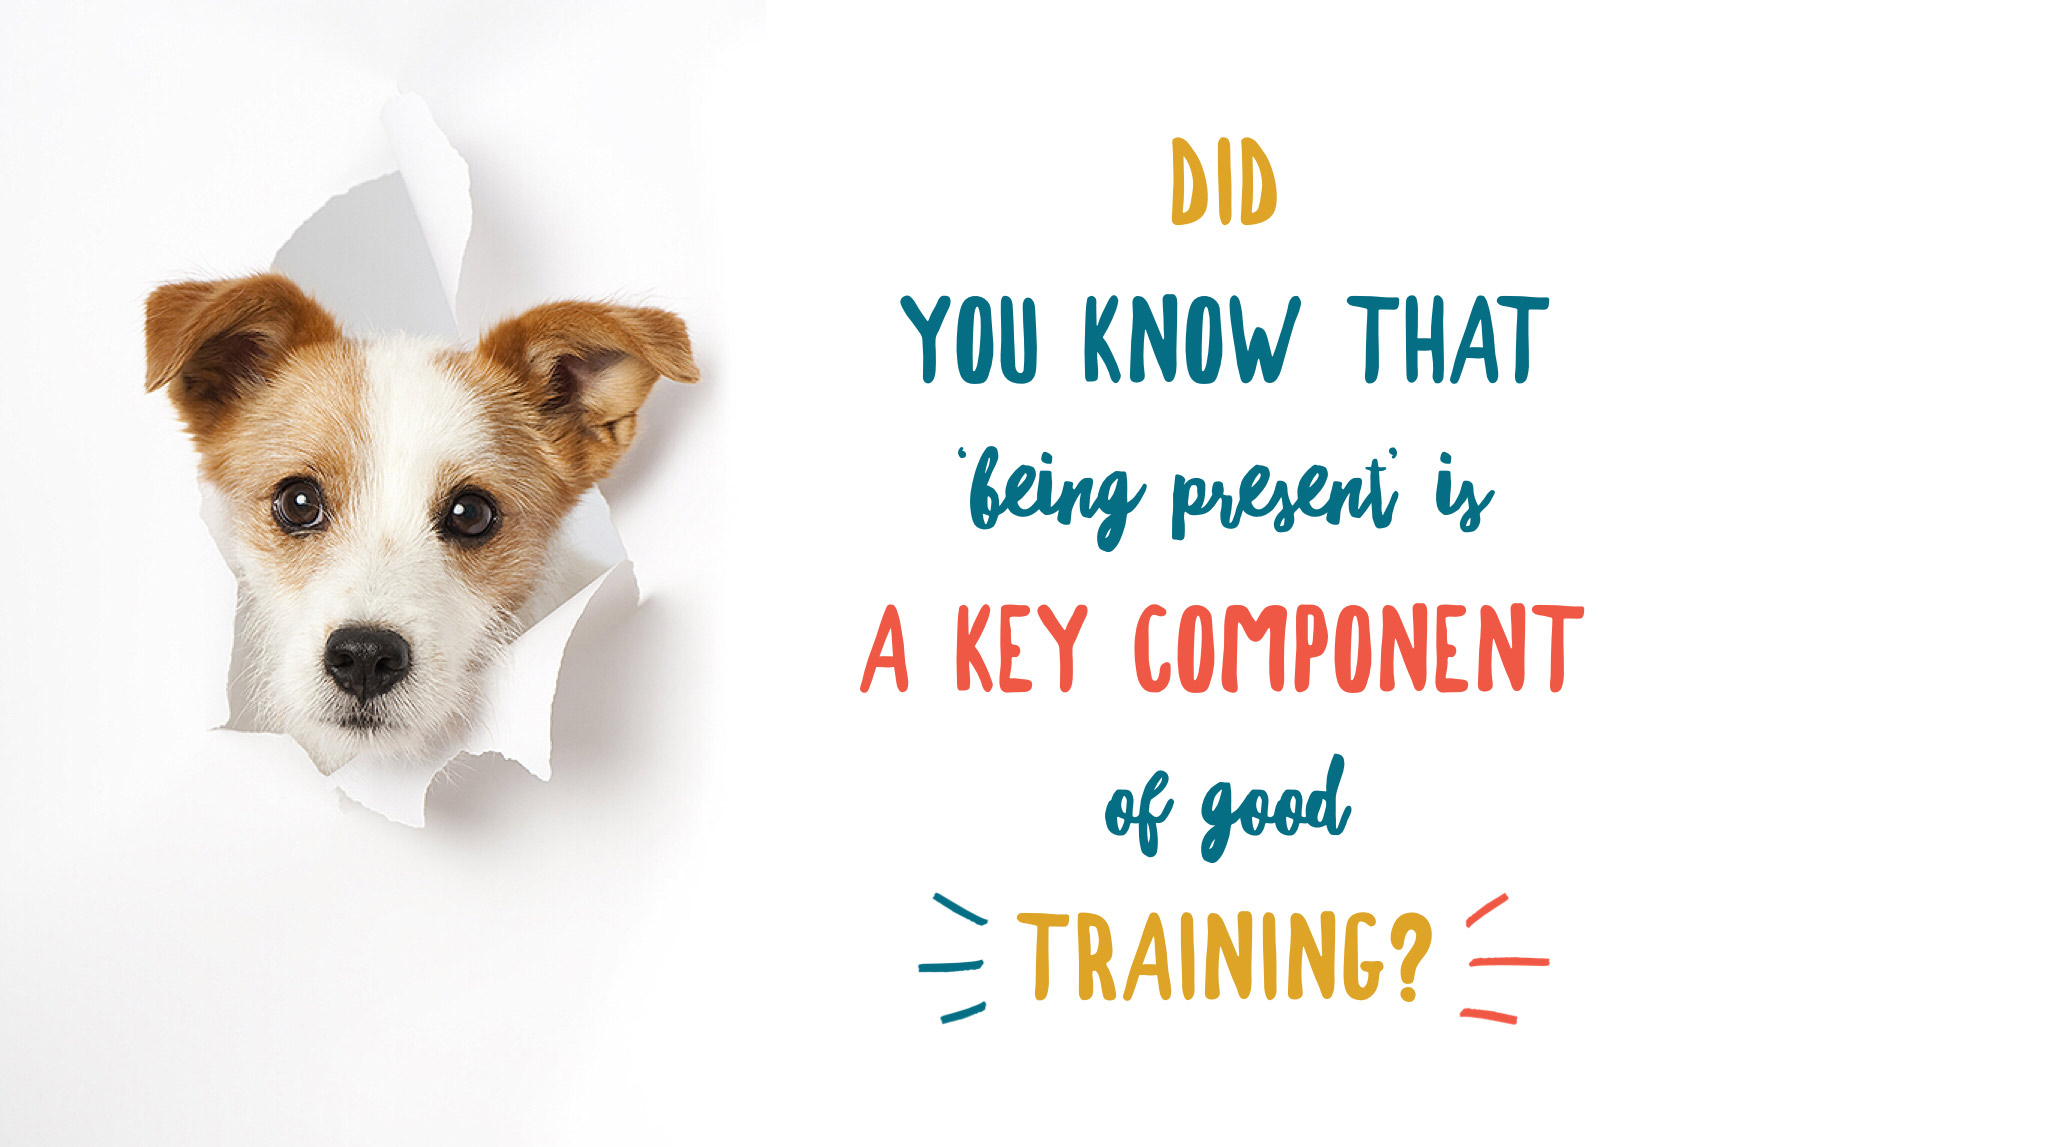 A young jack russell puppy’s head has burst through the white paper on the left of the page. He is facing the camera. On the left is text which reads: Did you know that being present is a key component of good training?